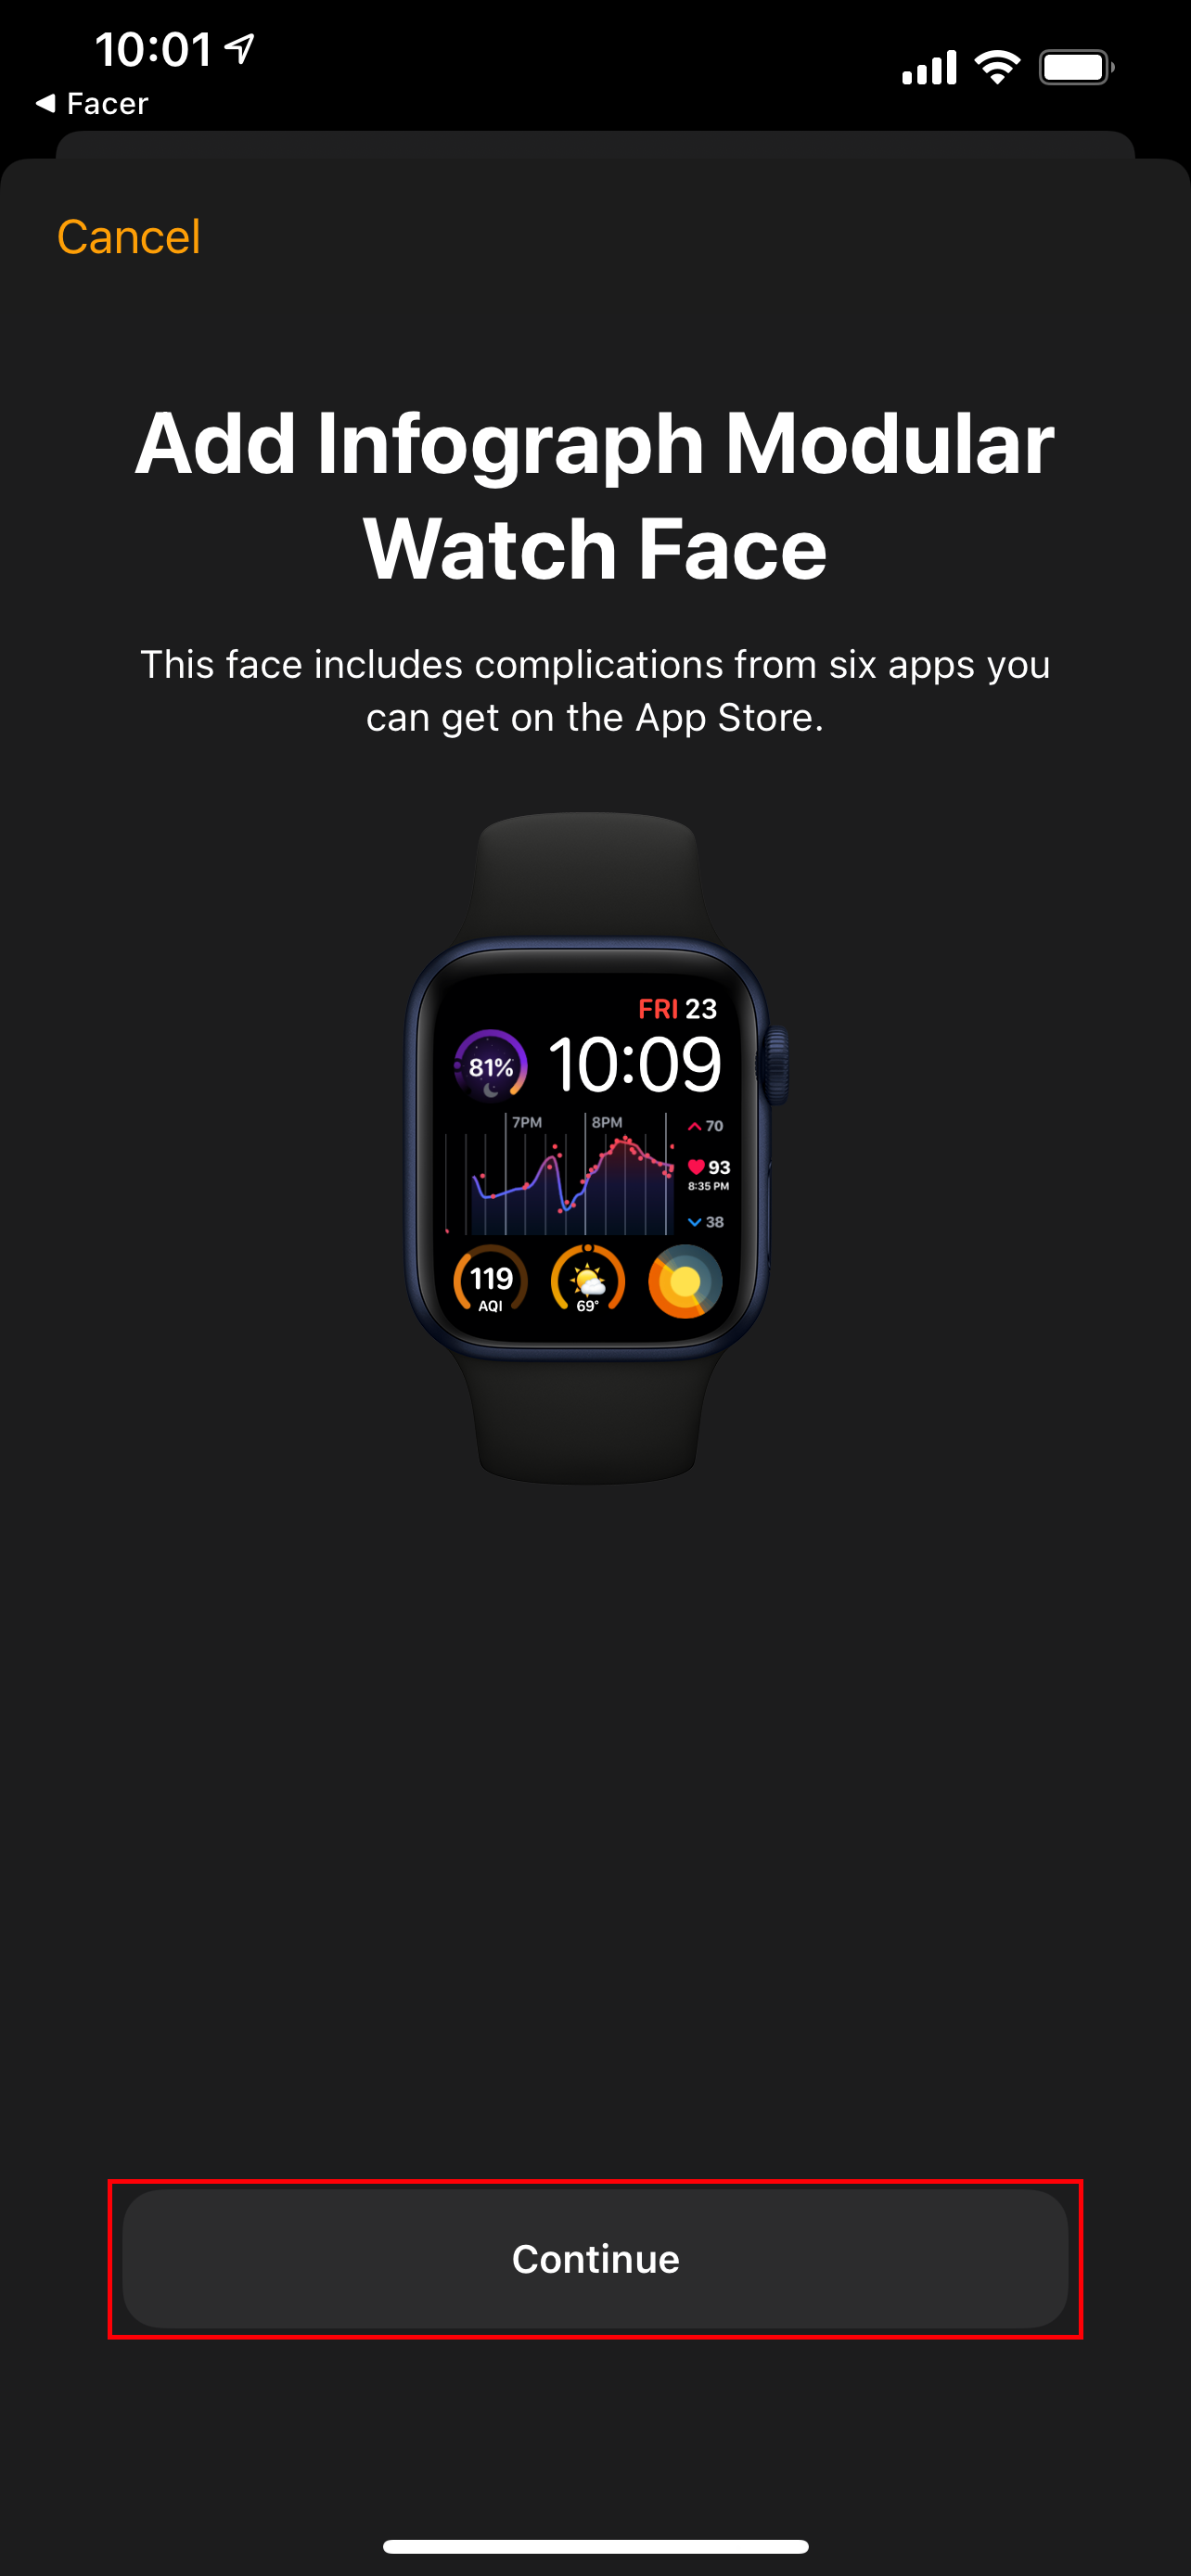 Add facer watch face to Watch app